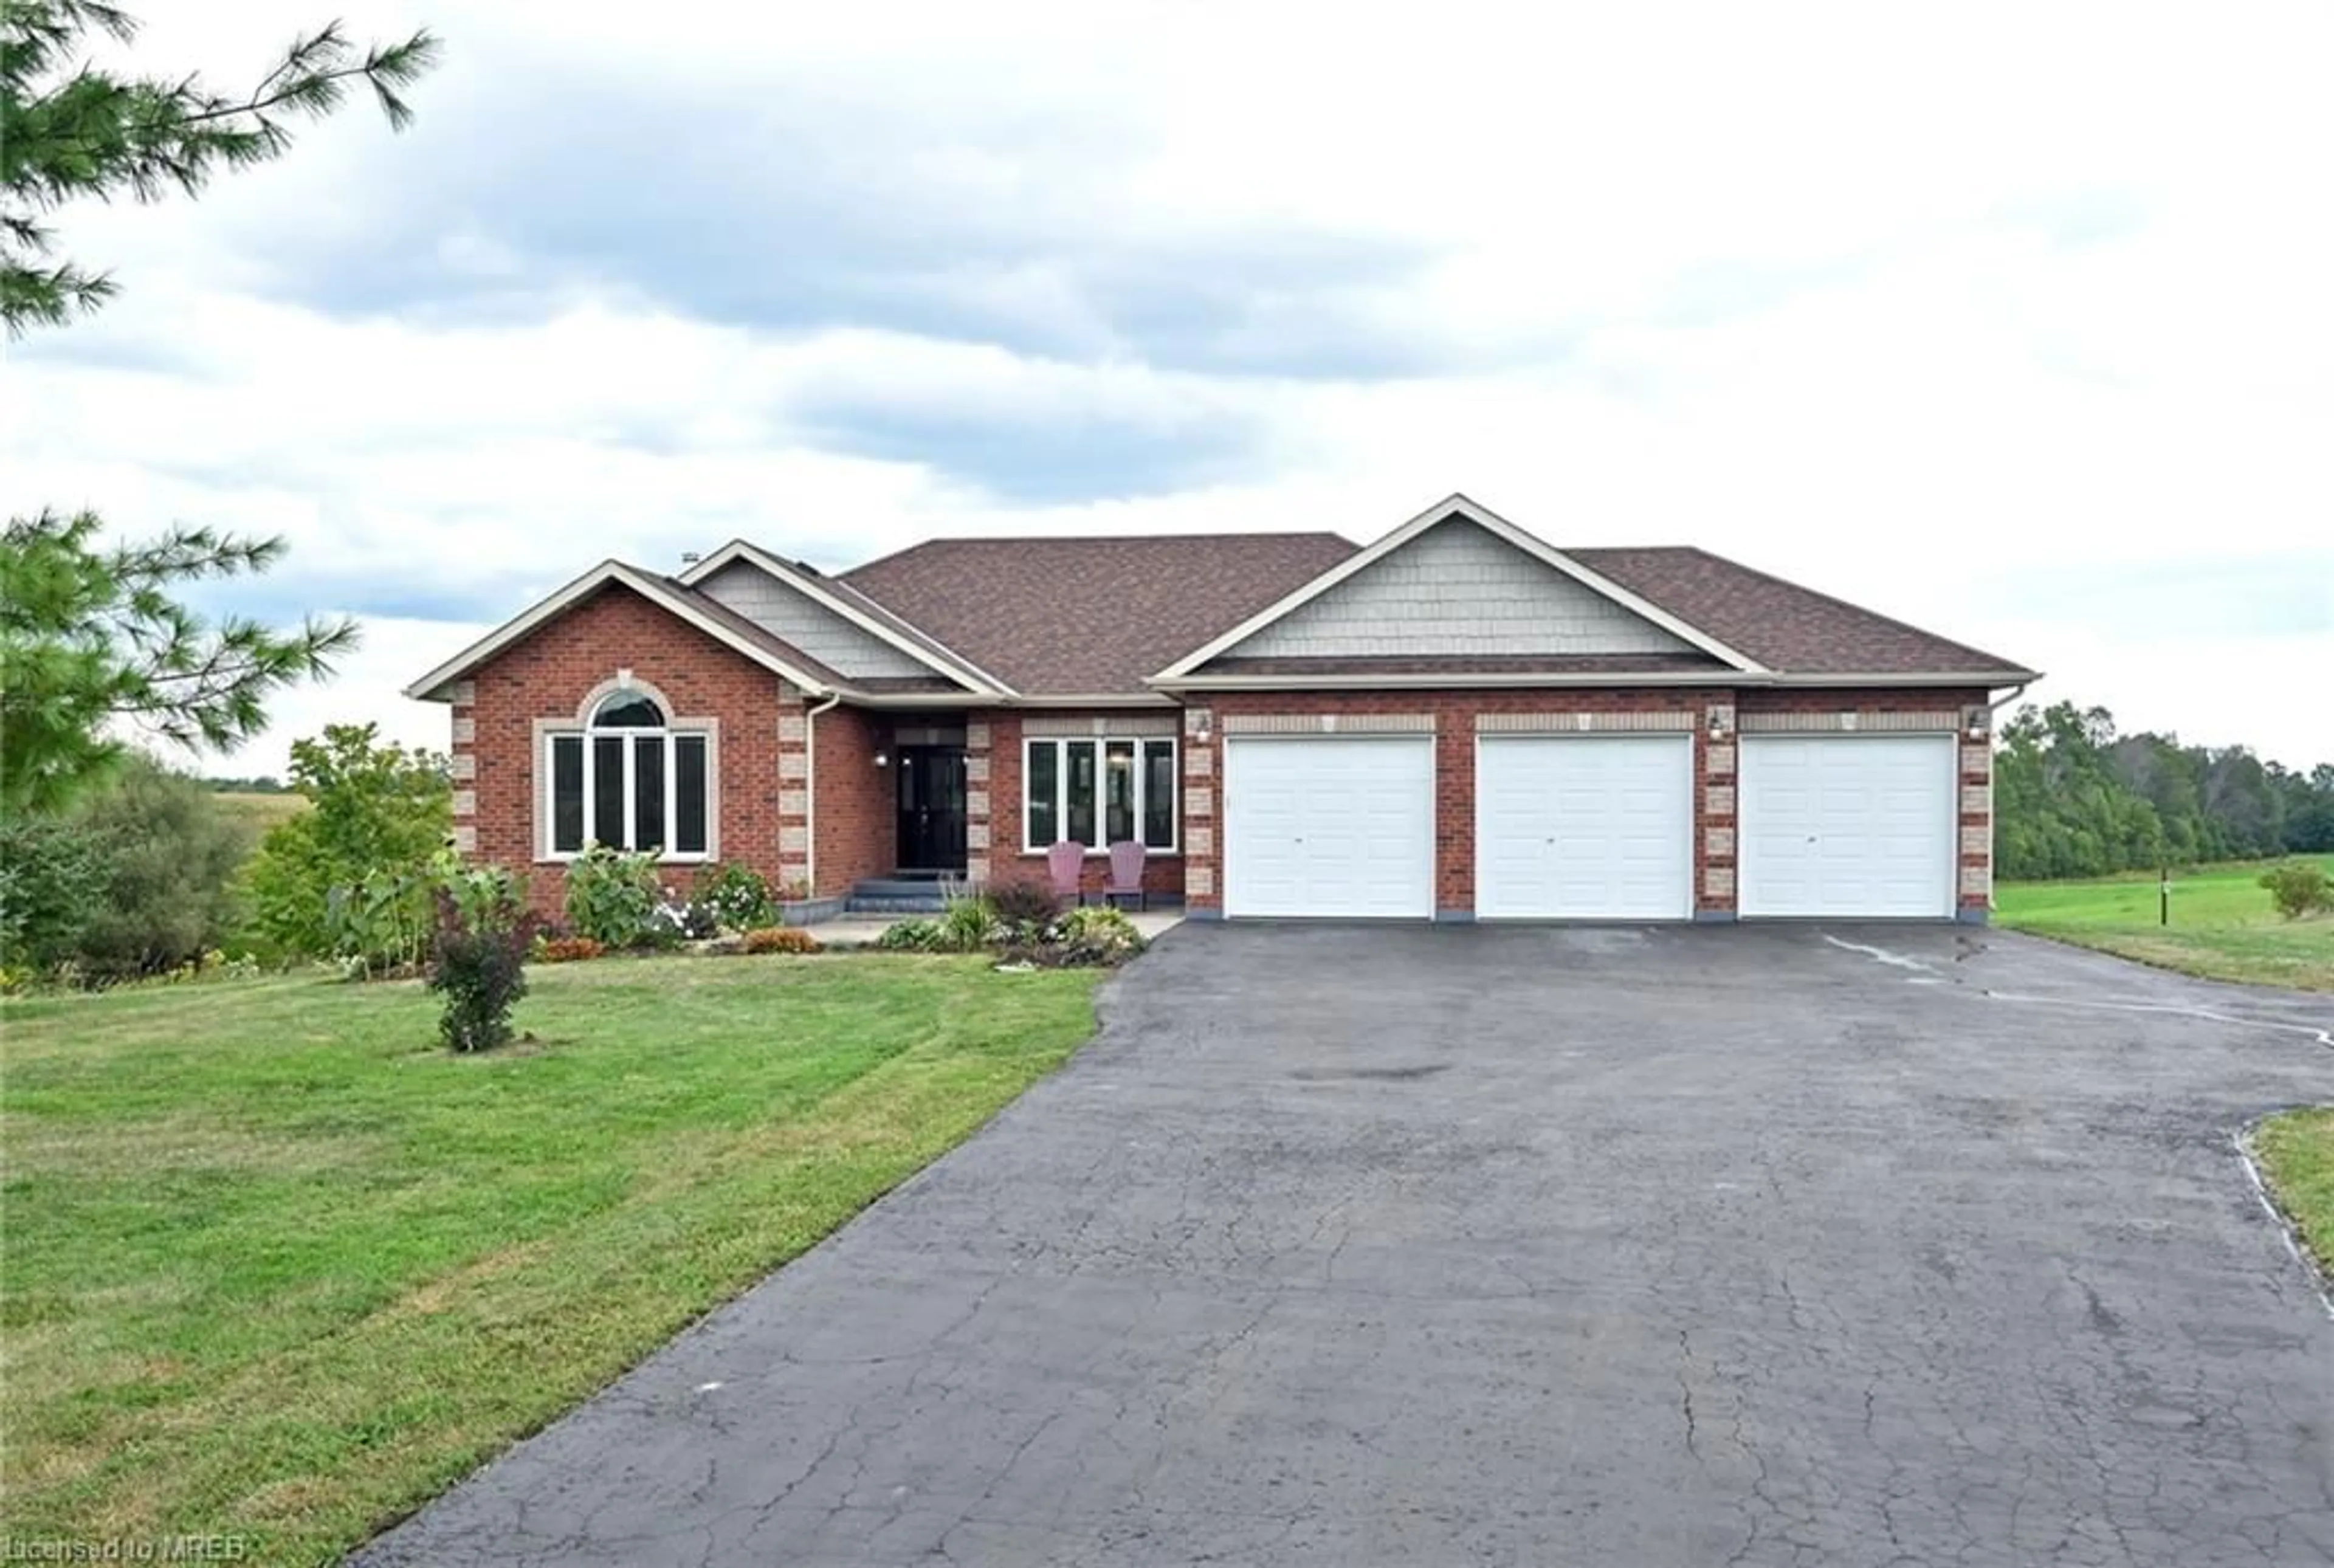 Home with brick exterior material for 5759 Concession 3 Rd, Simcoe Ontario L0M 1J0